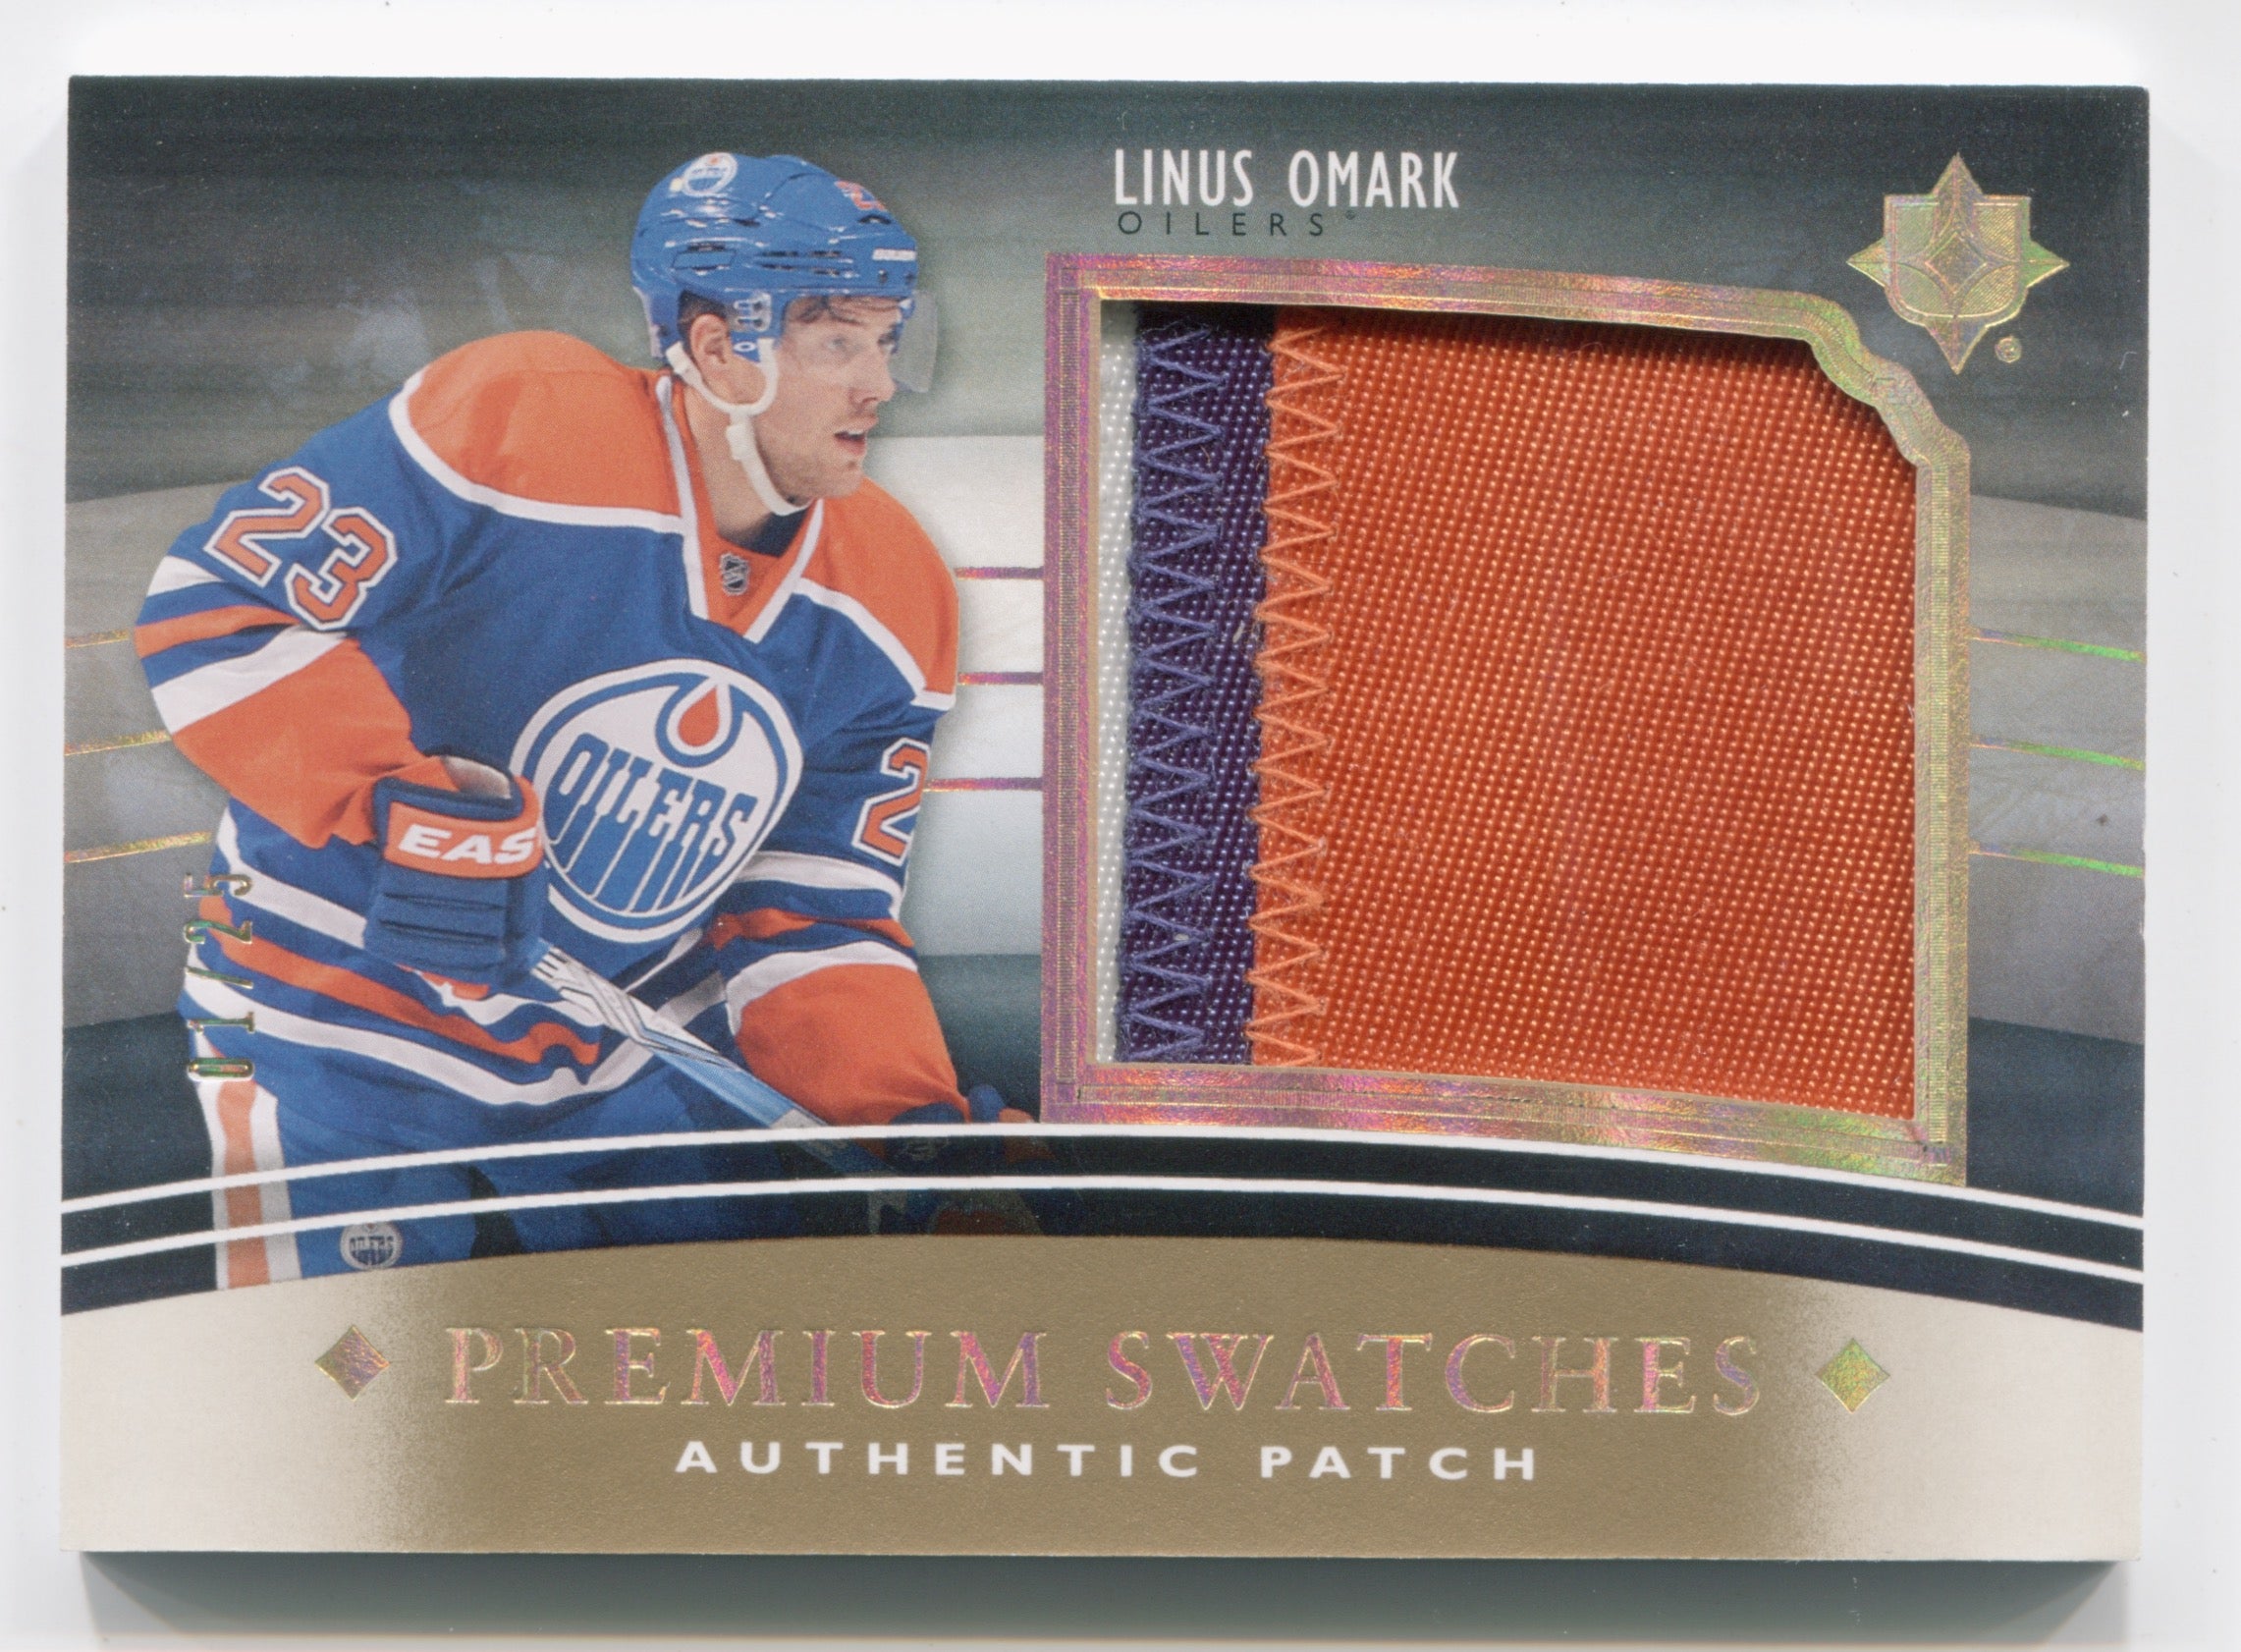 2011-12 Ultimate Collection Premium Patches #PSLO Linus Omark #01/25 | Eastridge Sports Cards